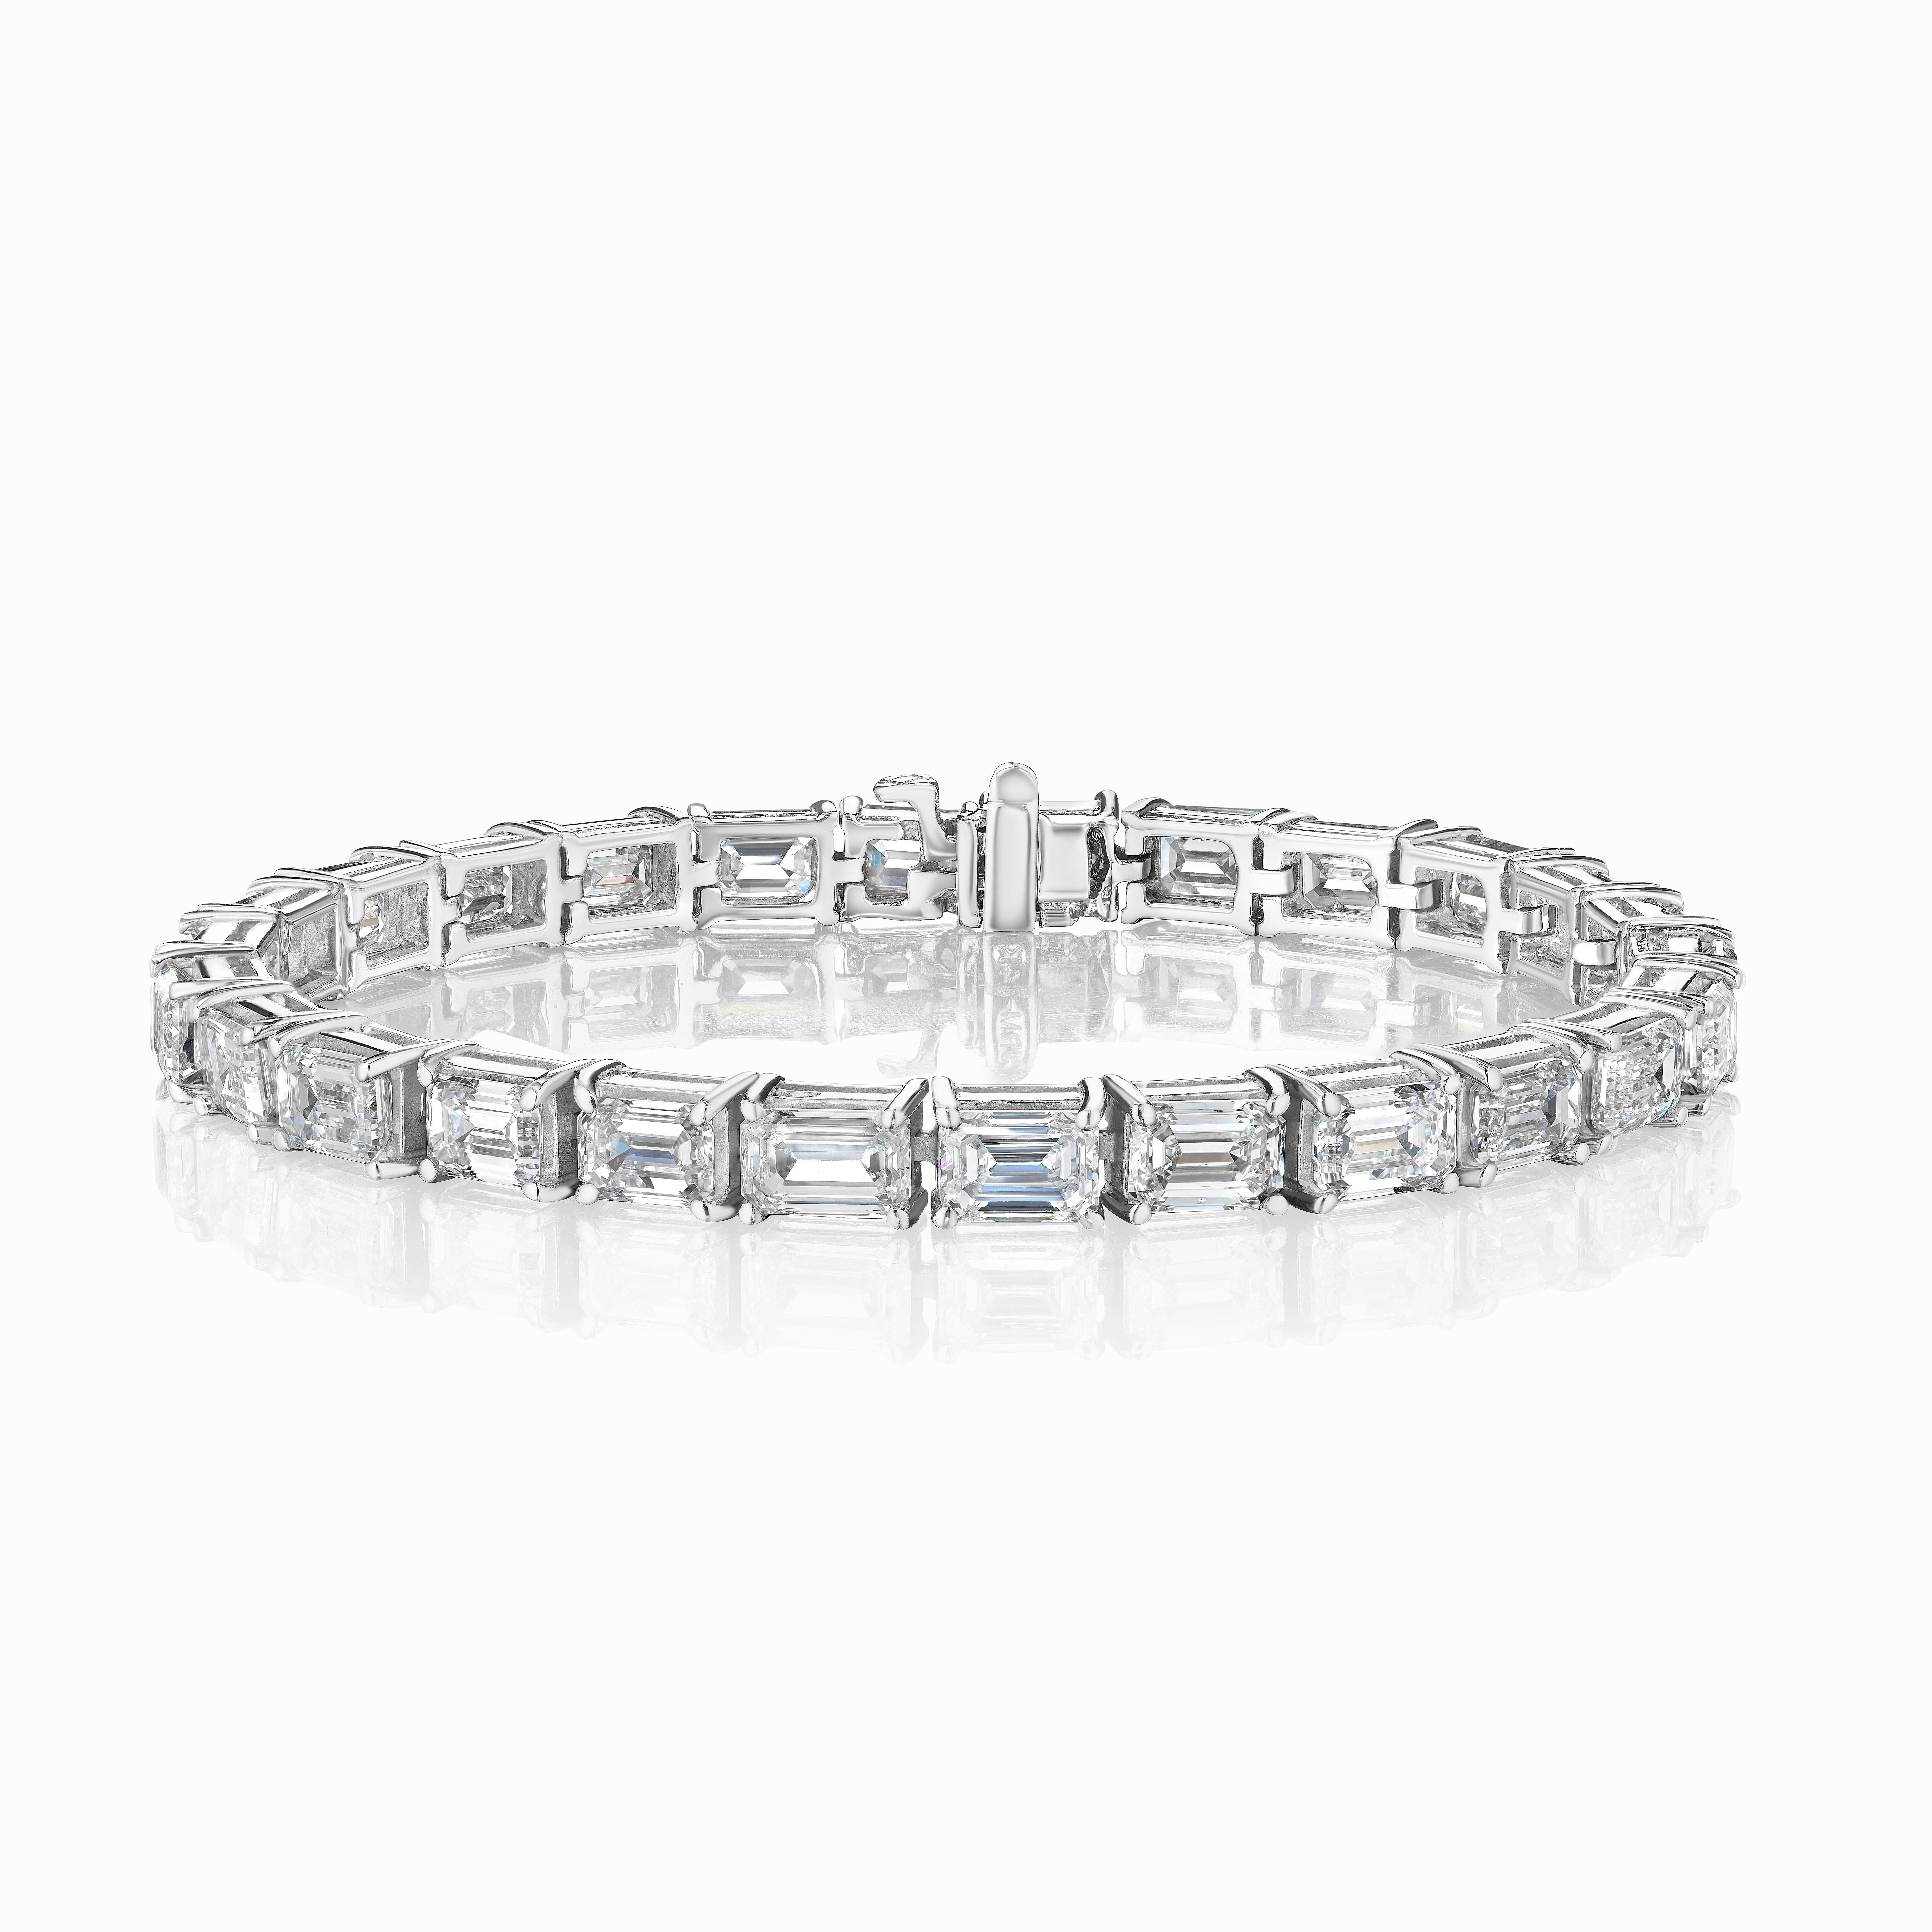 GIA Certified 18.20 Carat Emerald Cut Diamond Platinum Bracelet In New Condition For Sale In New York, NY